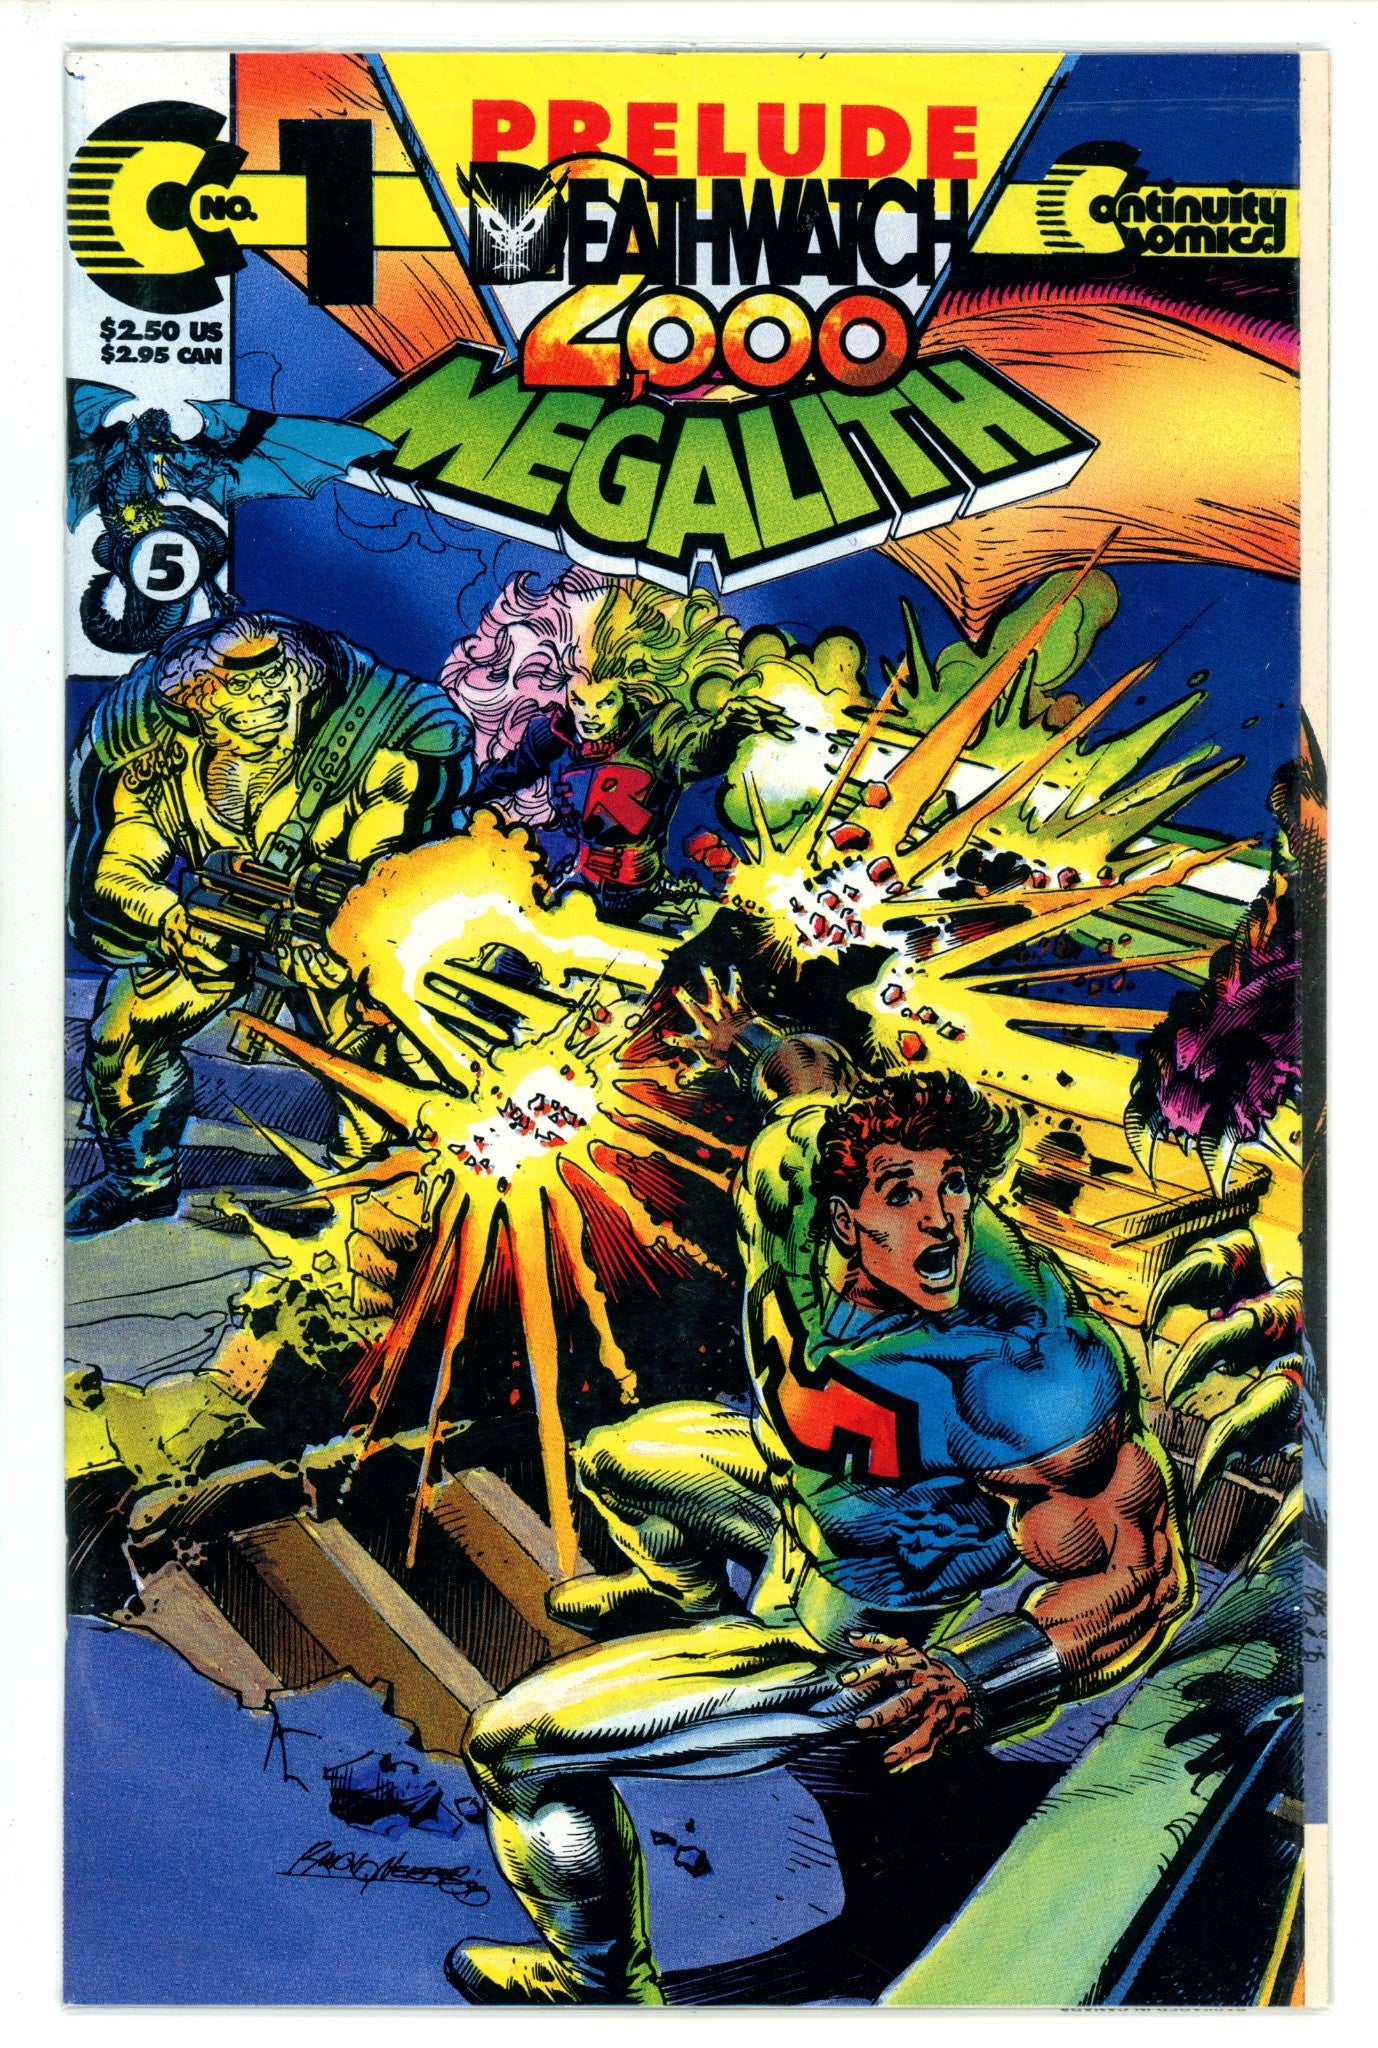 Megalith Vol 2 1 Sealed (1993)